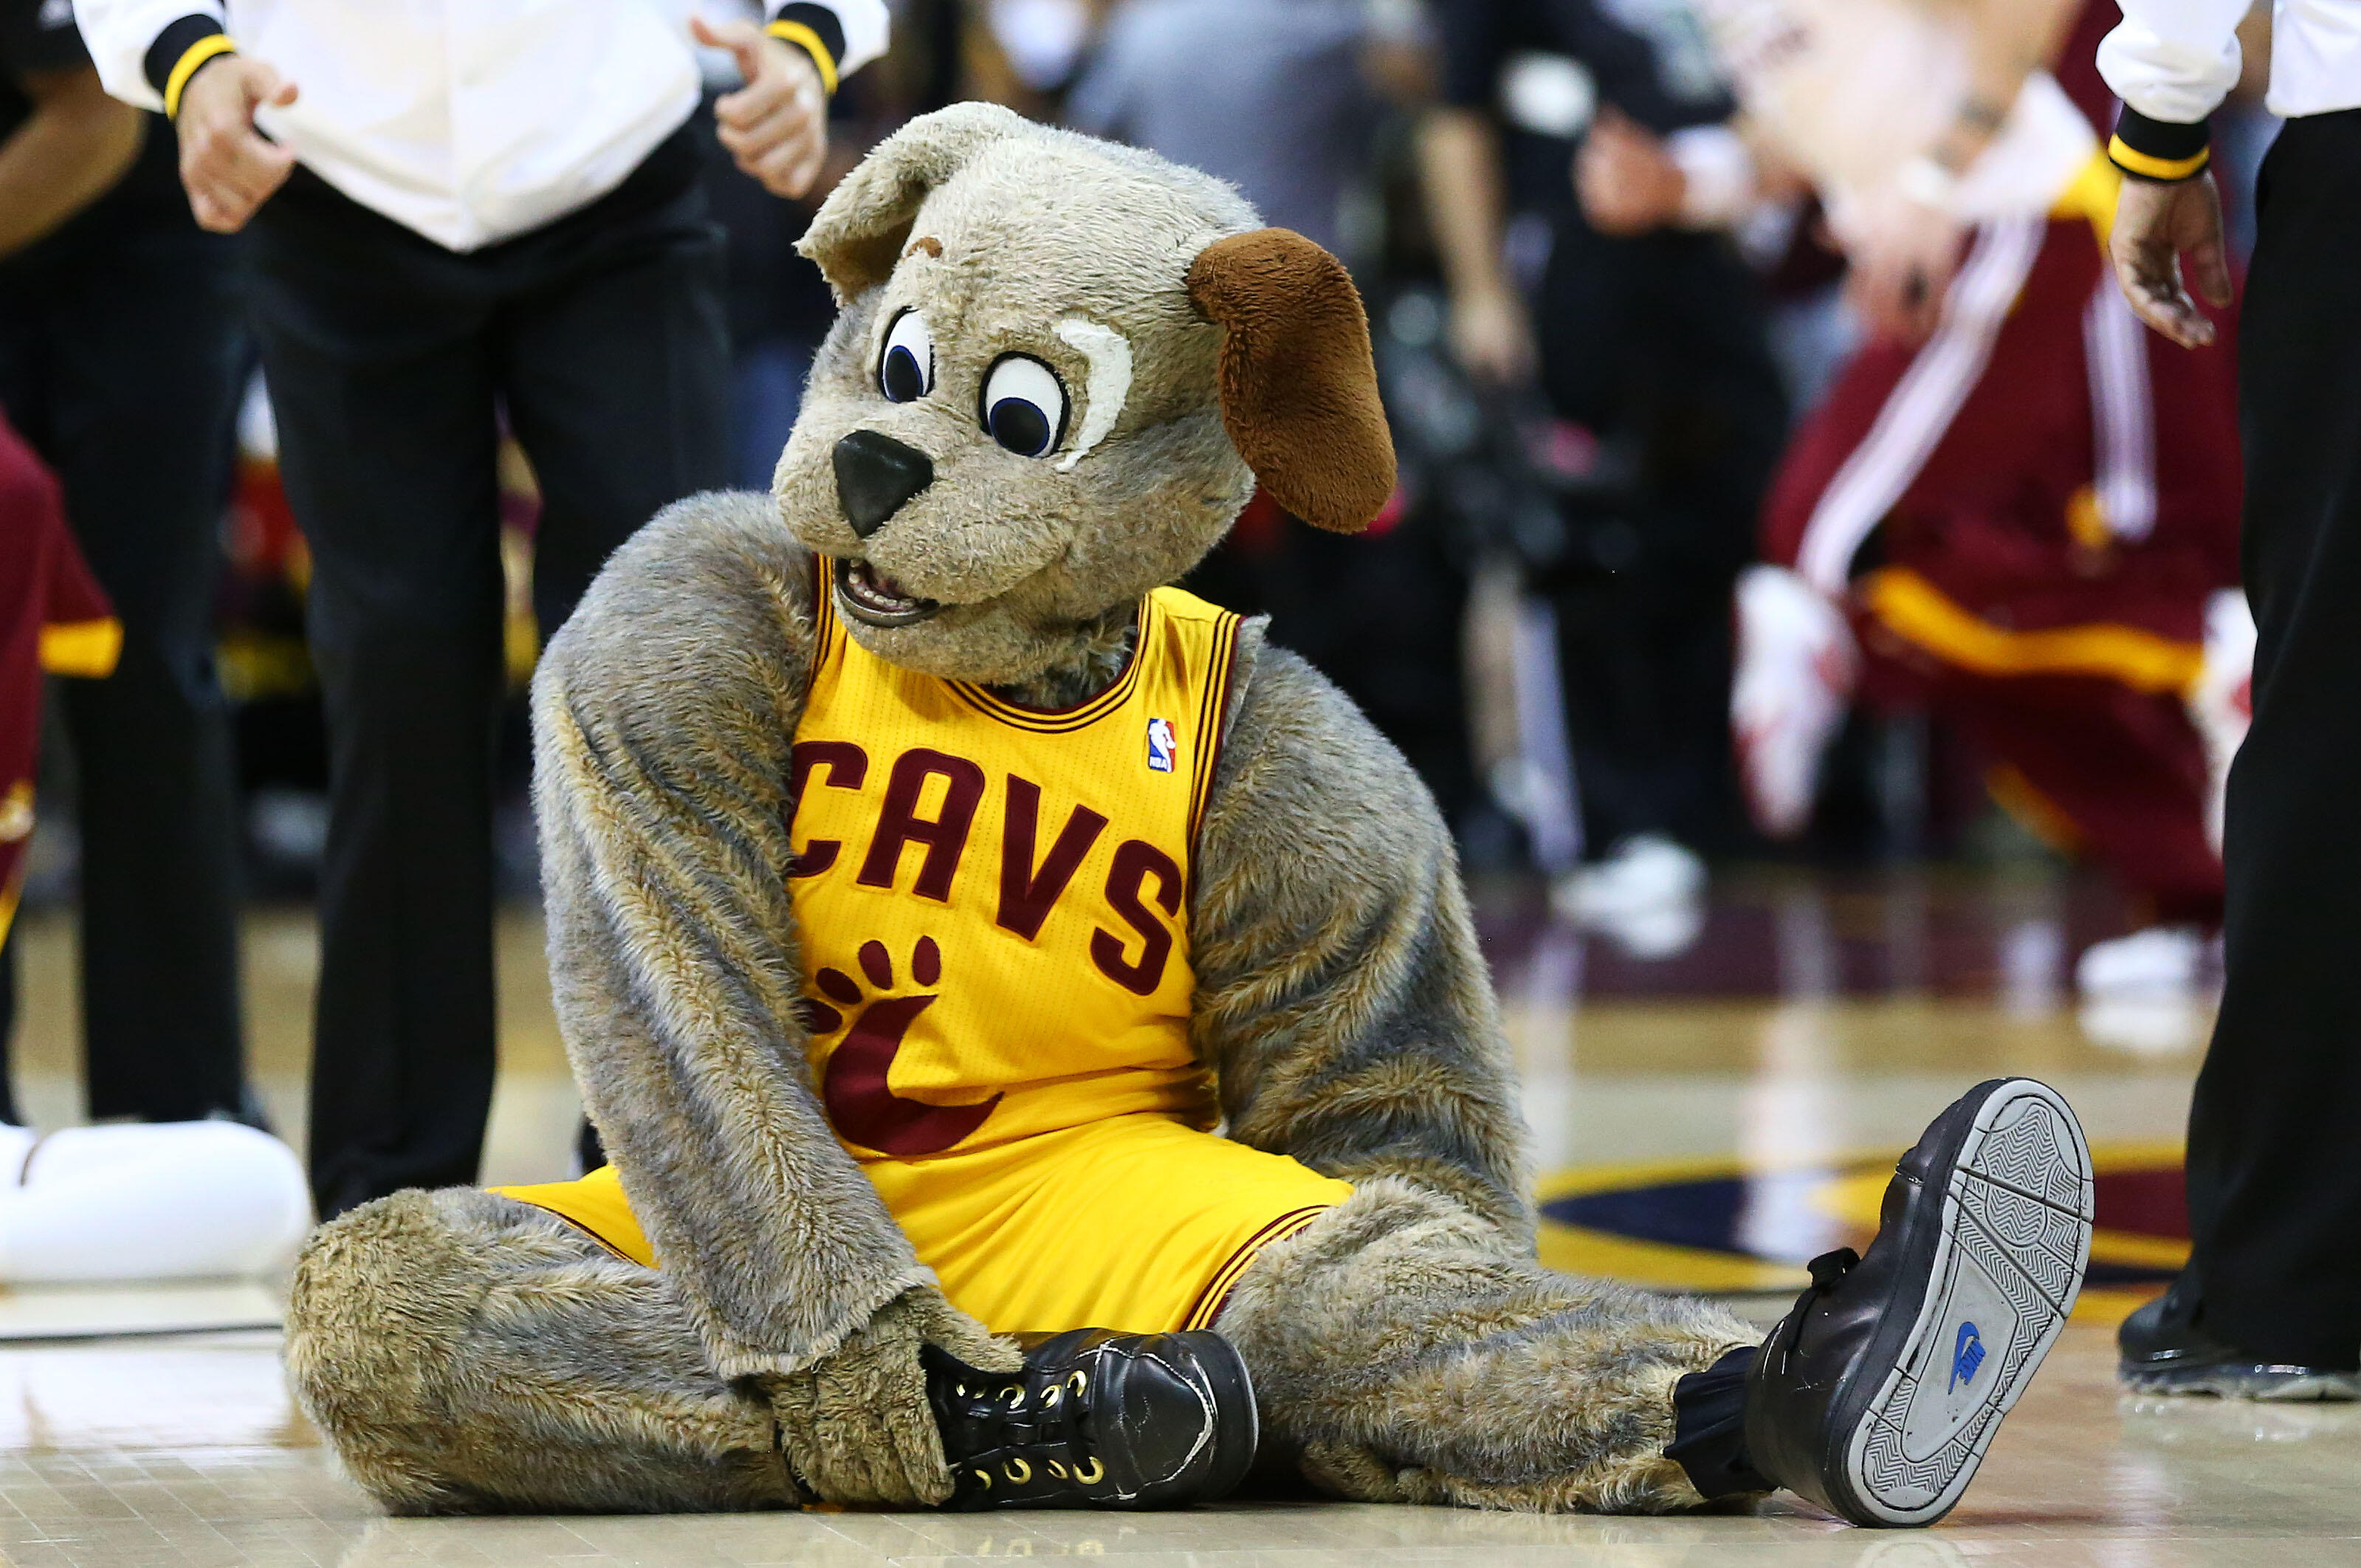 NBA mascots ranked from worst to best